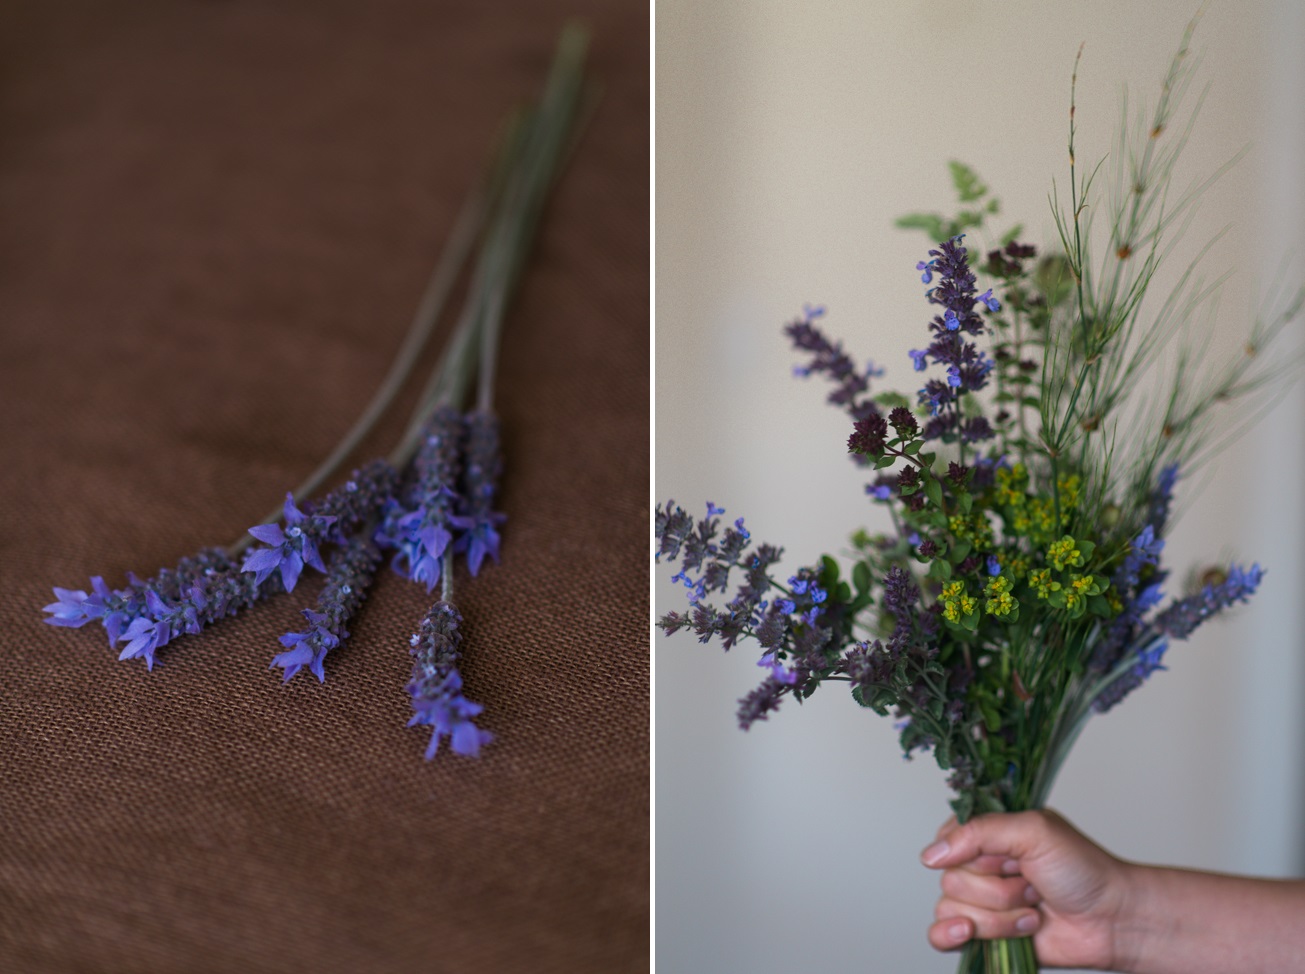 A Beautiful Just-Picked Summer Bouquet of Foraged Flowers & Fruits